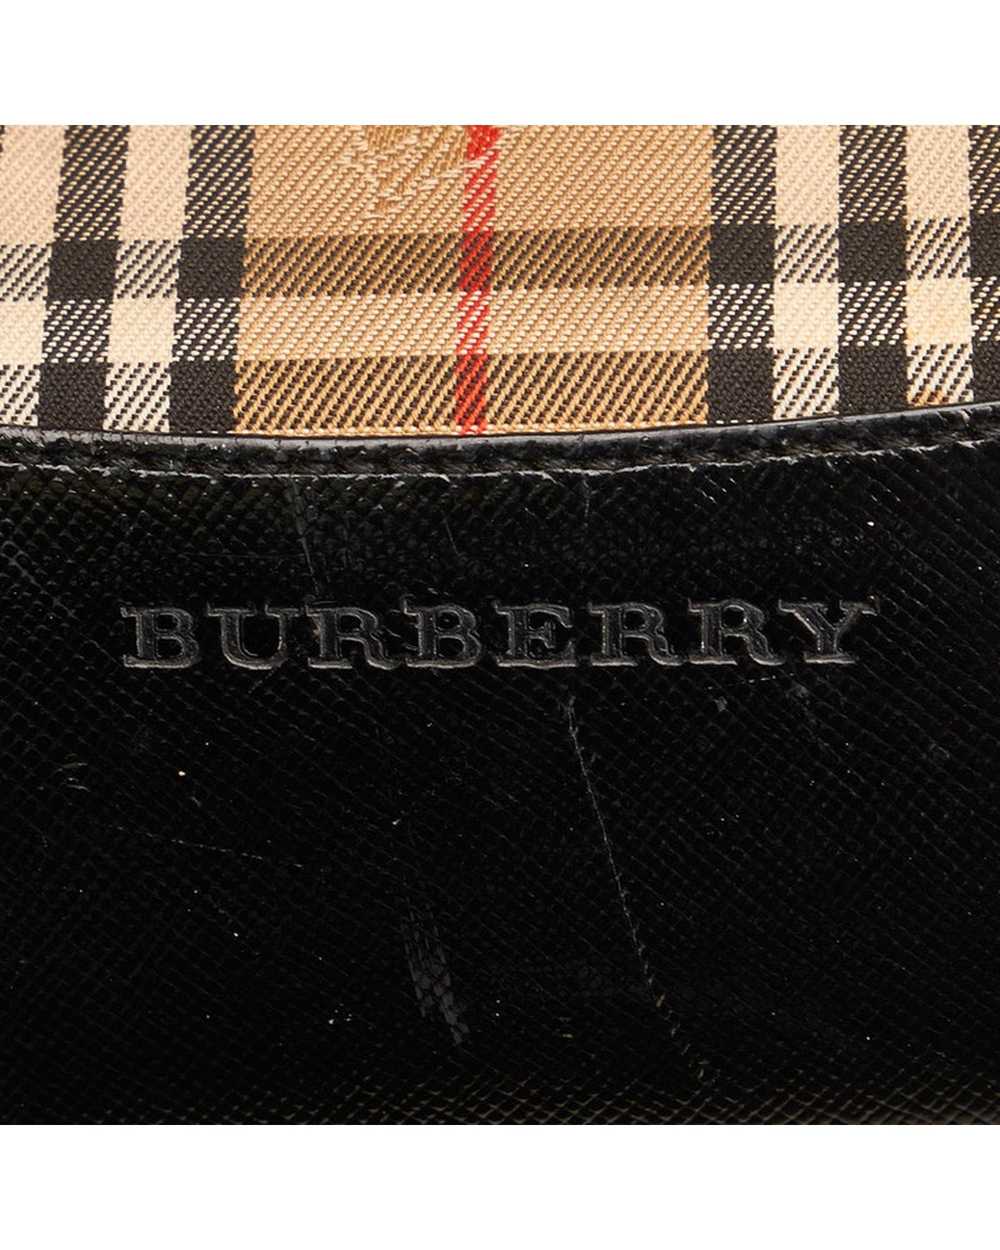 Burberry Classic Check Handbag in Brown - image 6